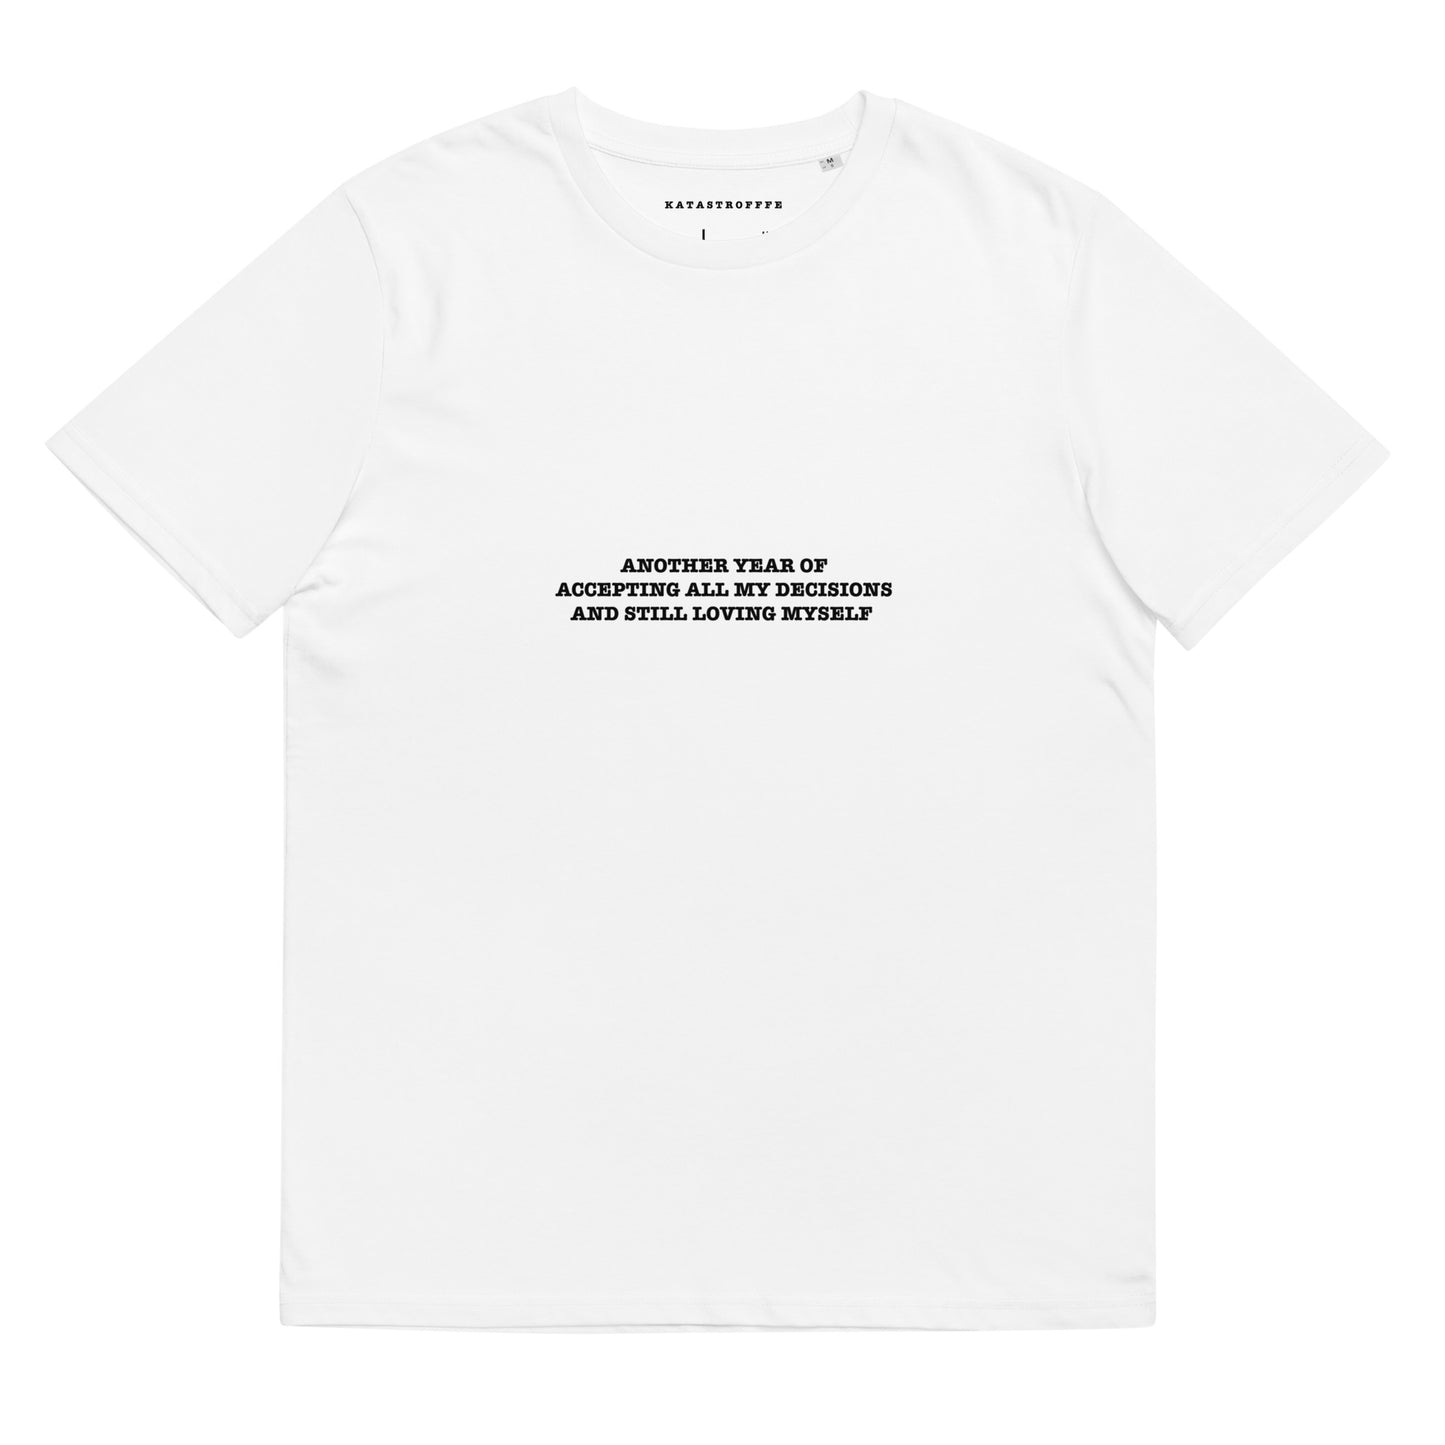 ANOTHER YEAR OF  ACCEPTING ALL MY DECISIONS  AND STILL LOVING MYSELF Katastrofffe Unisex organic cotton t-shirt